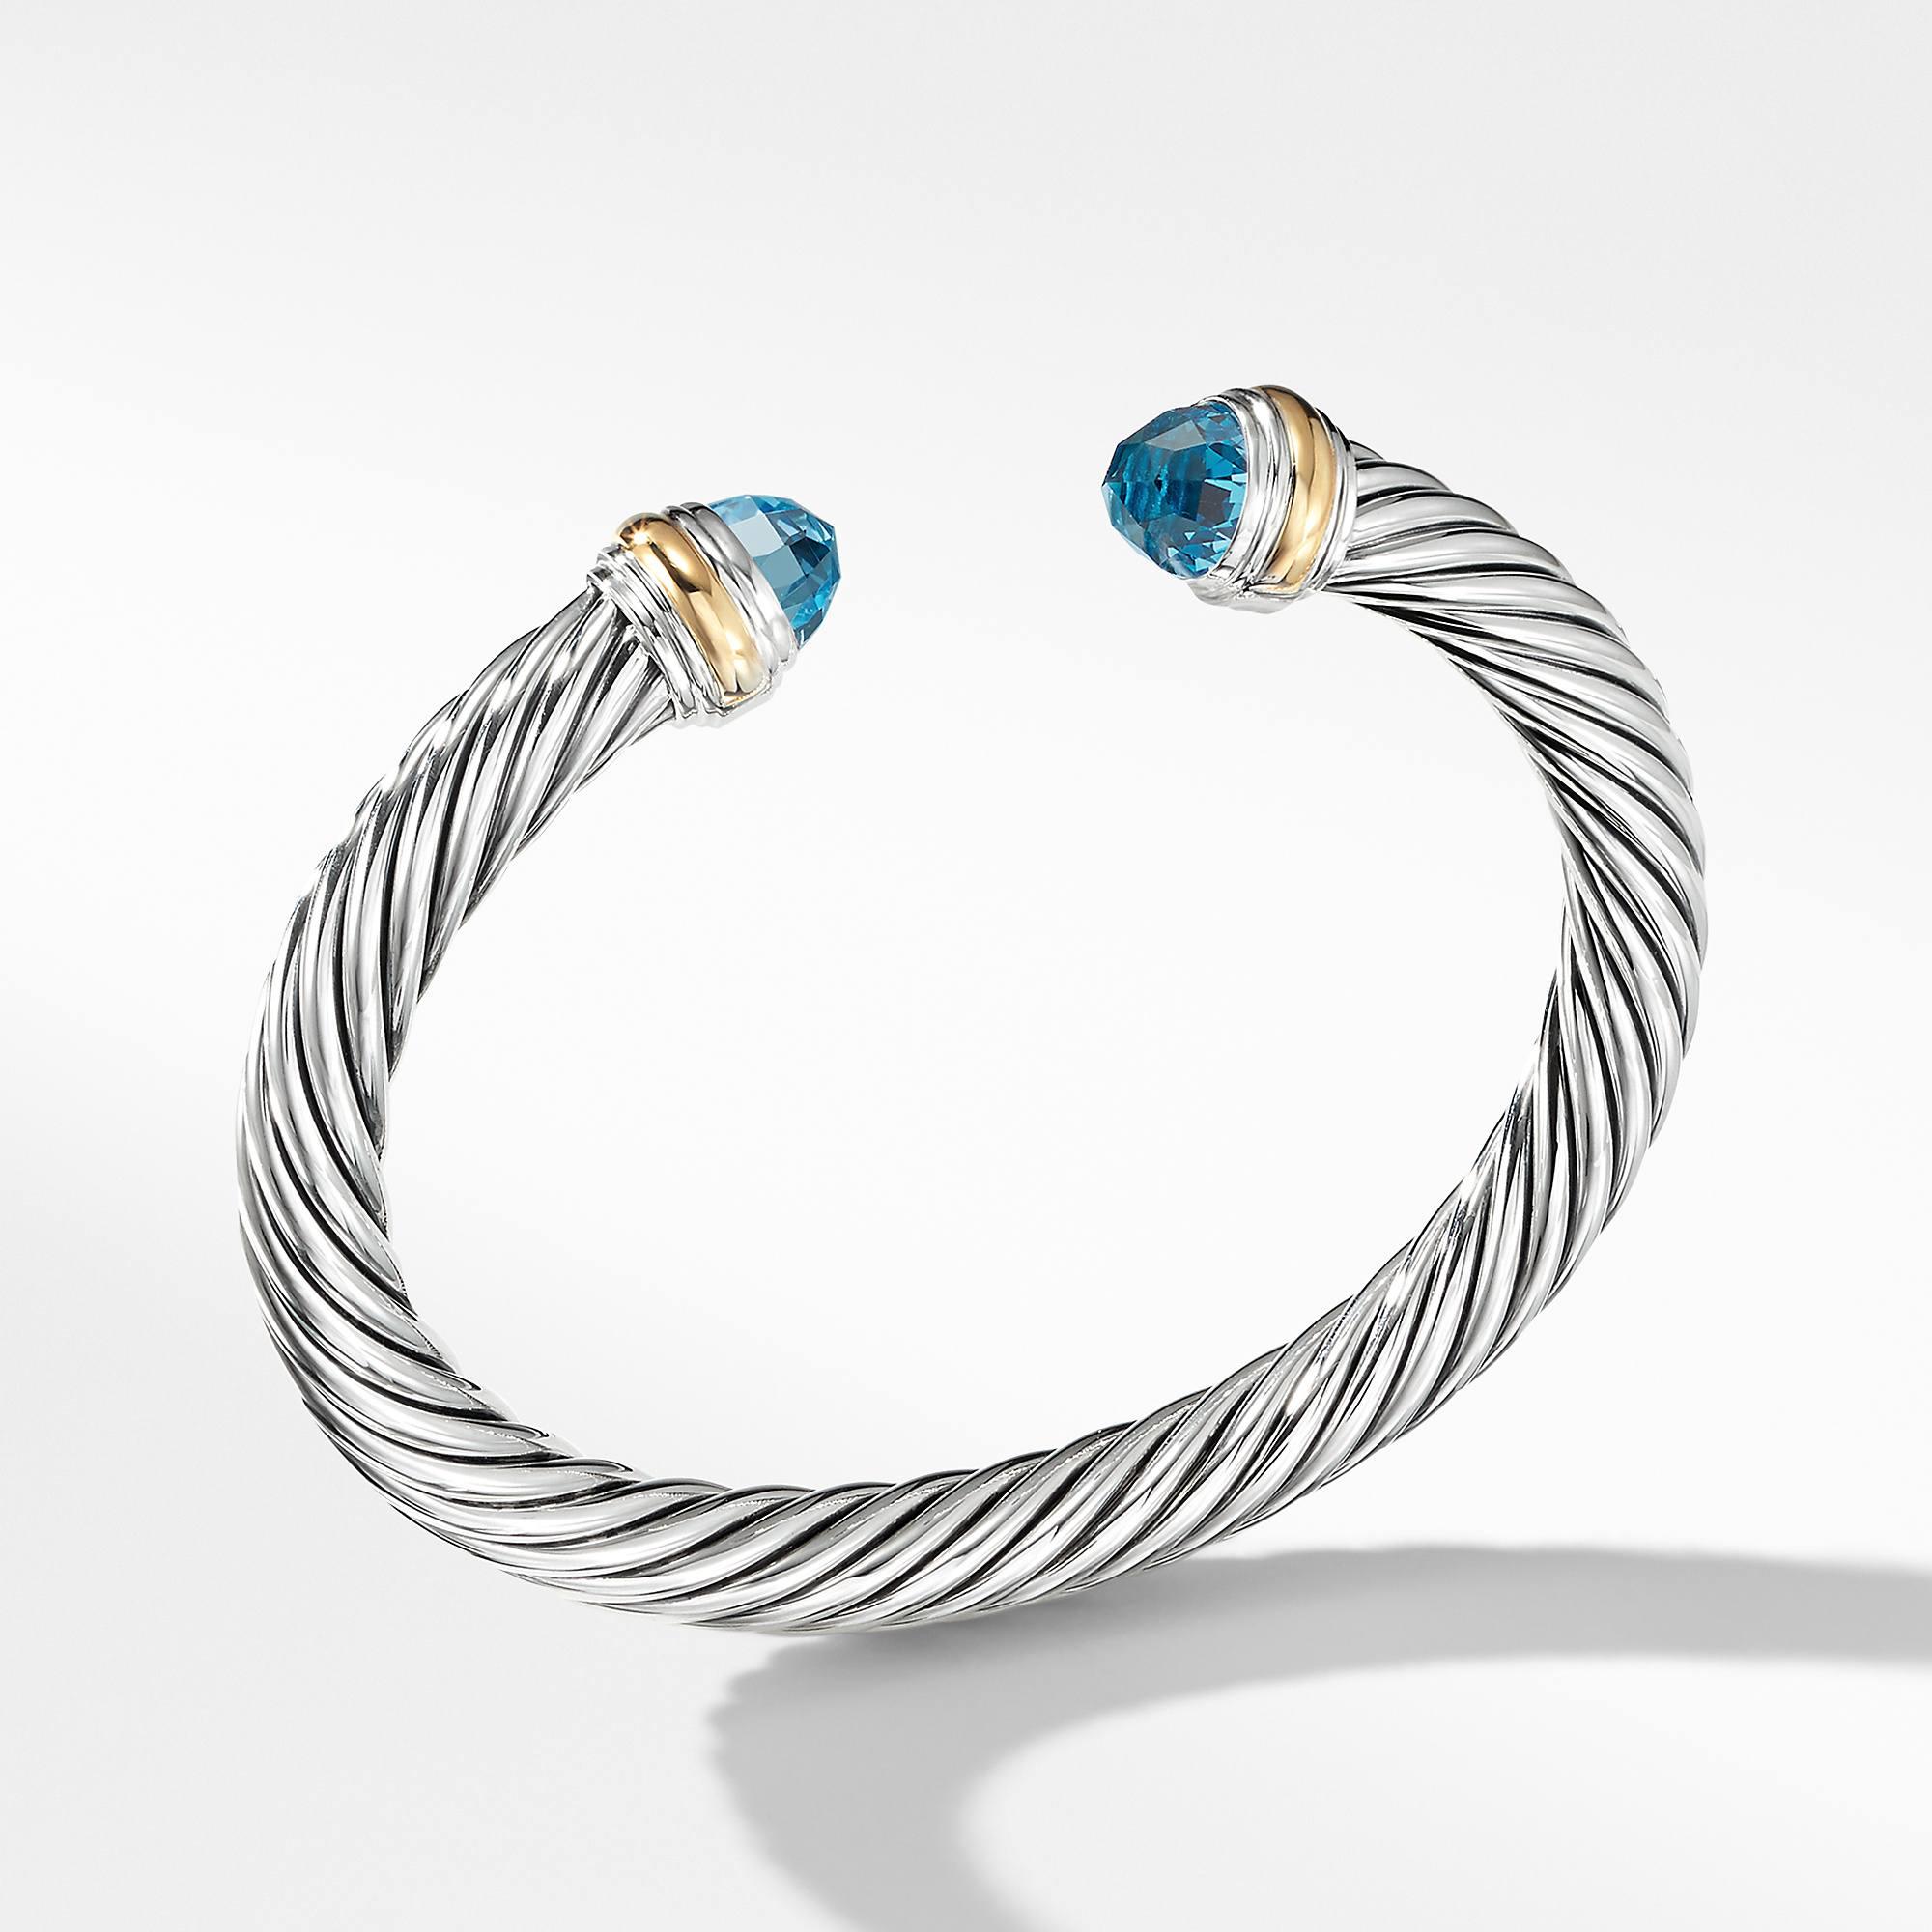 David Yurman Cable Classics Collection Bracelet with Blue Topaz and 14K Gold | Side View
